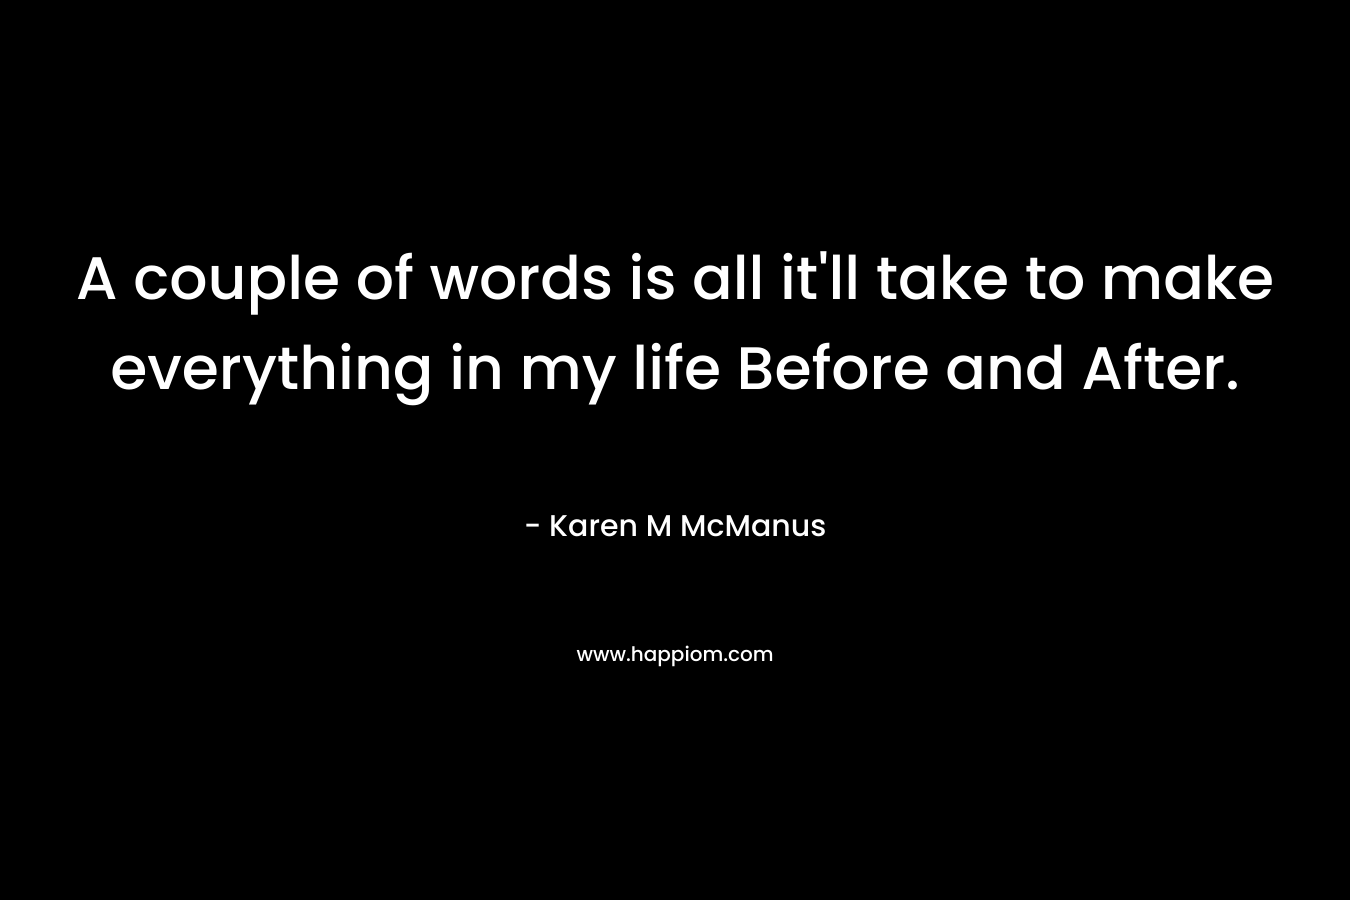 A couple of words is all it’ll take to make everything in my life Before and After. – Karen M McManus